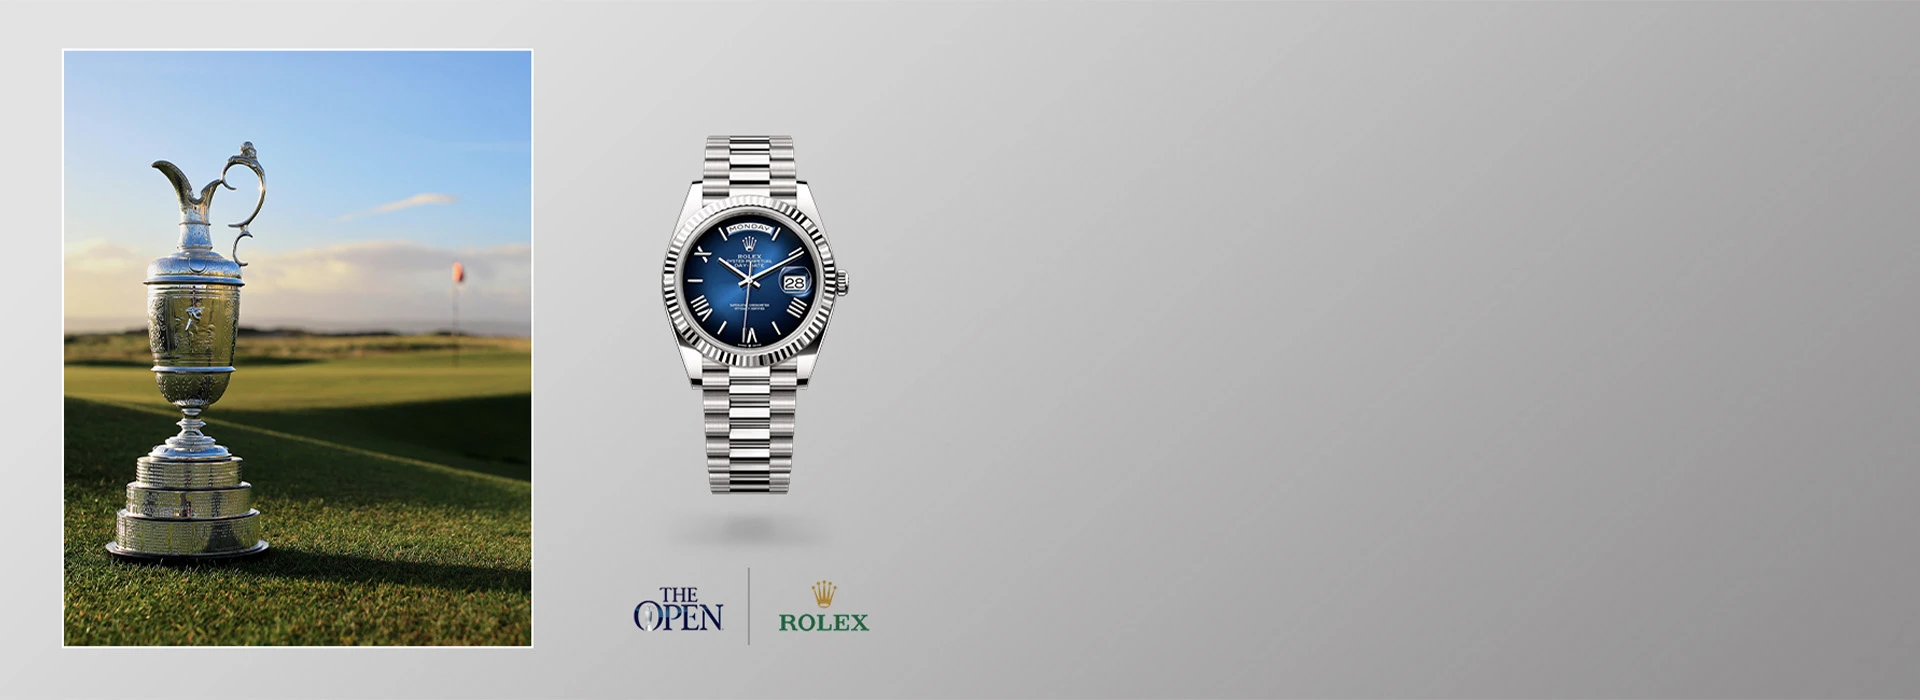 Rolex and golf